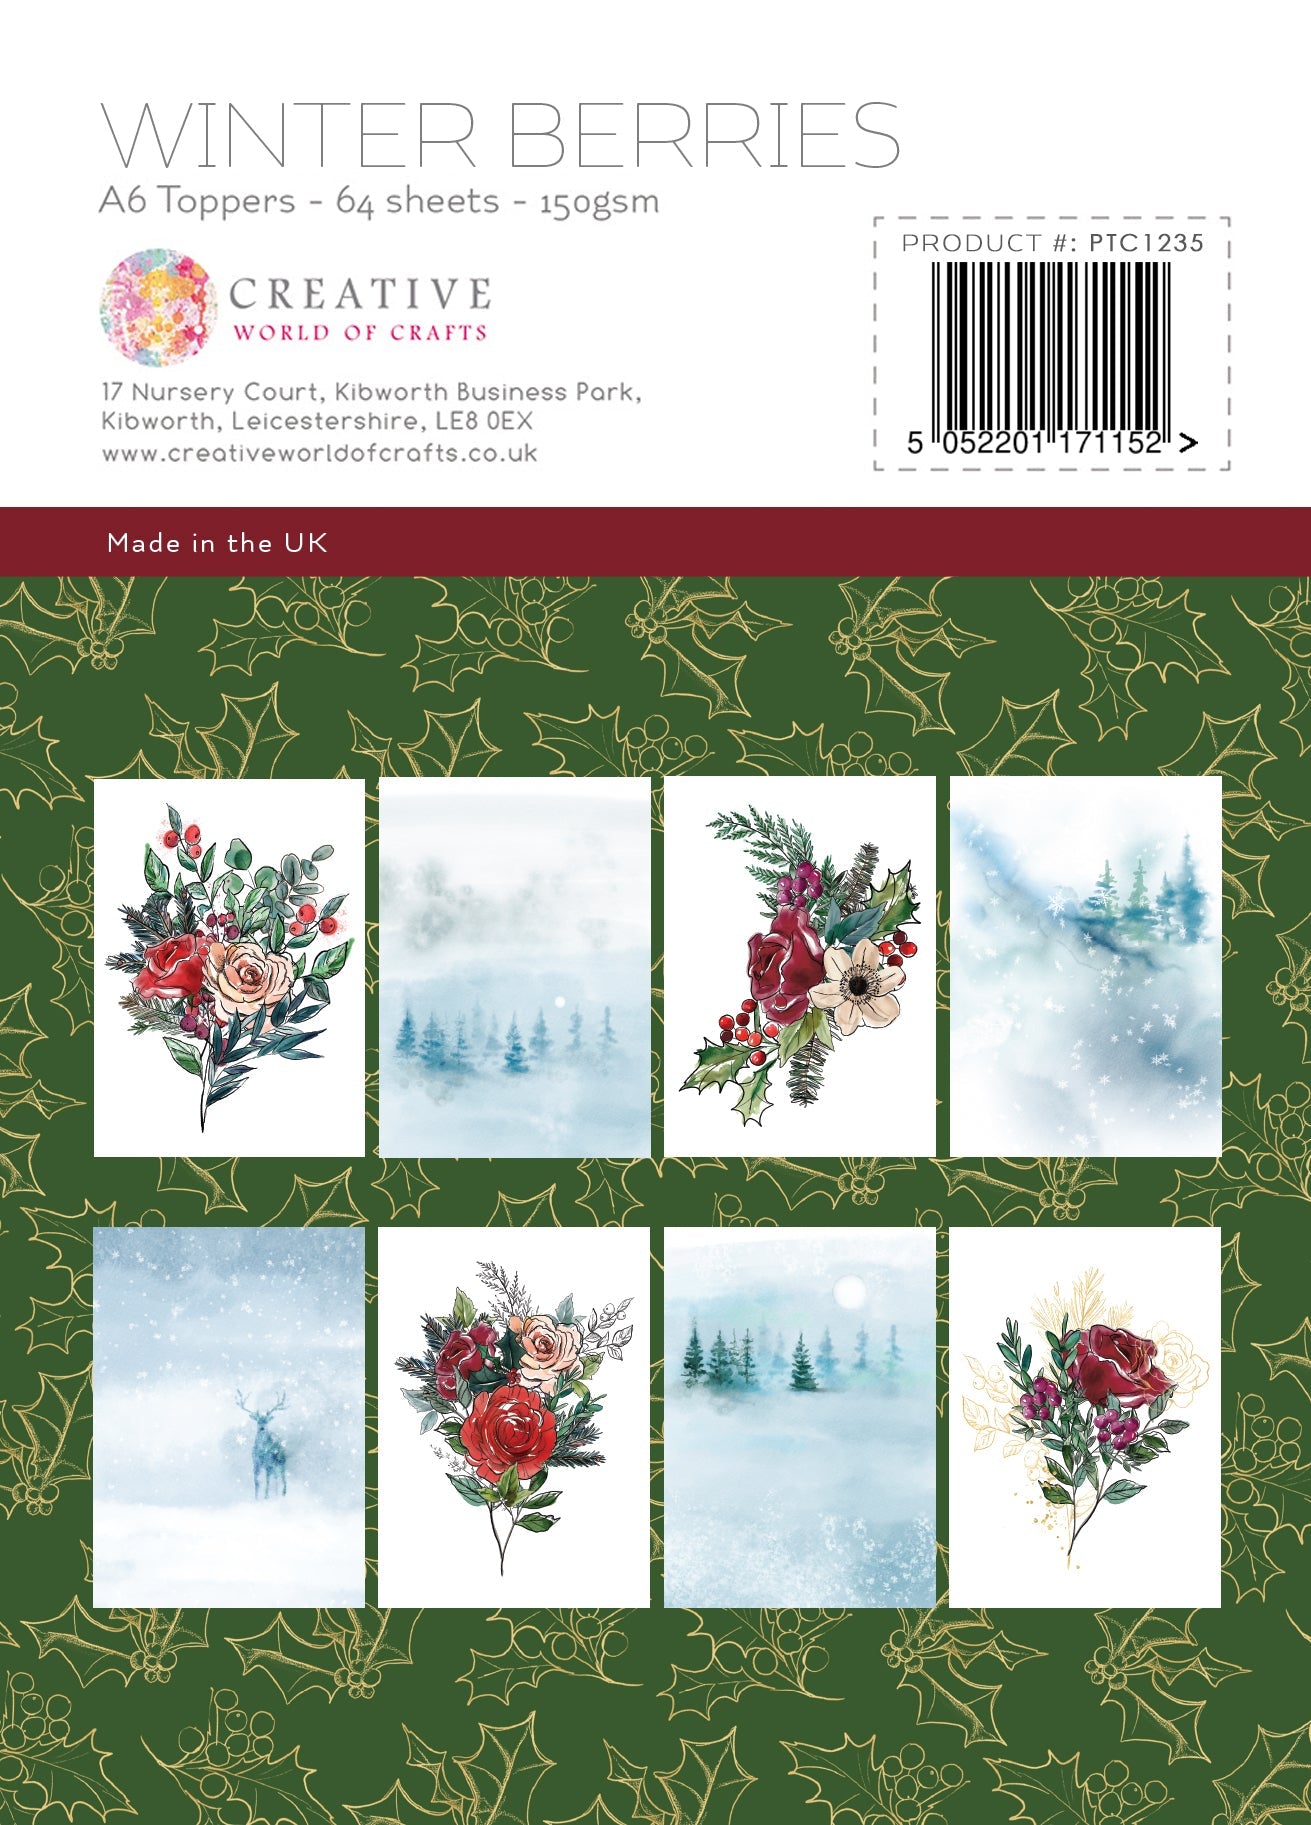 The Paper Tree Winter Berries A6 Topper Pad